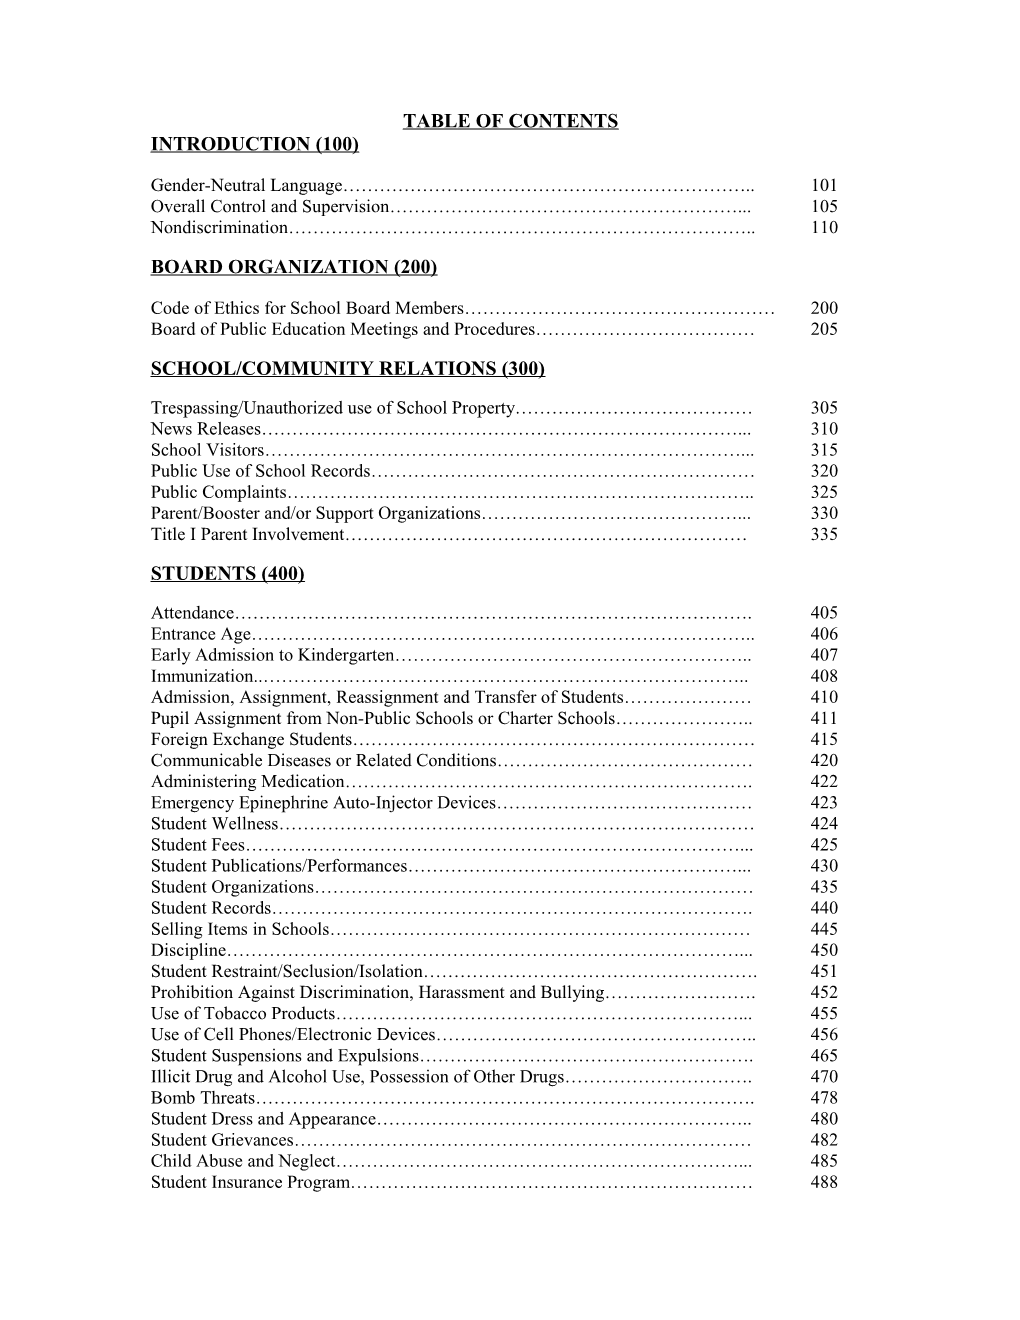 Table of Contents s79